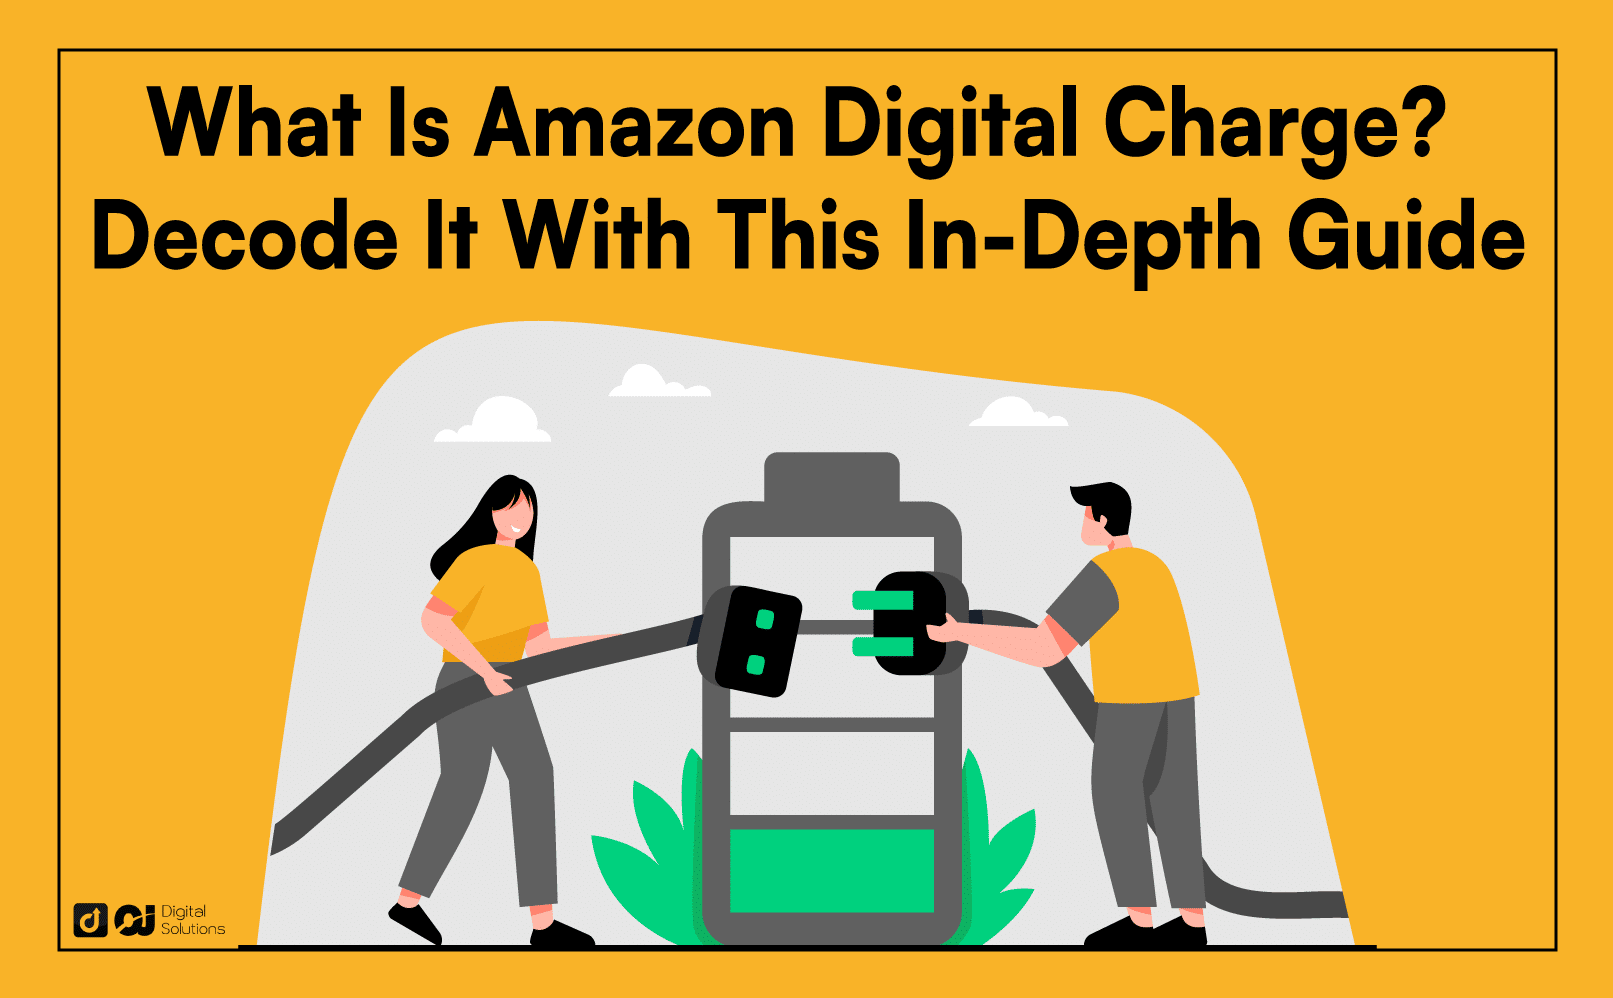 What is Amazon Digital Charge